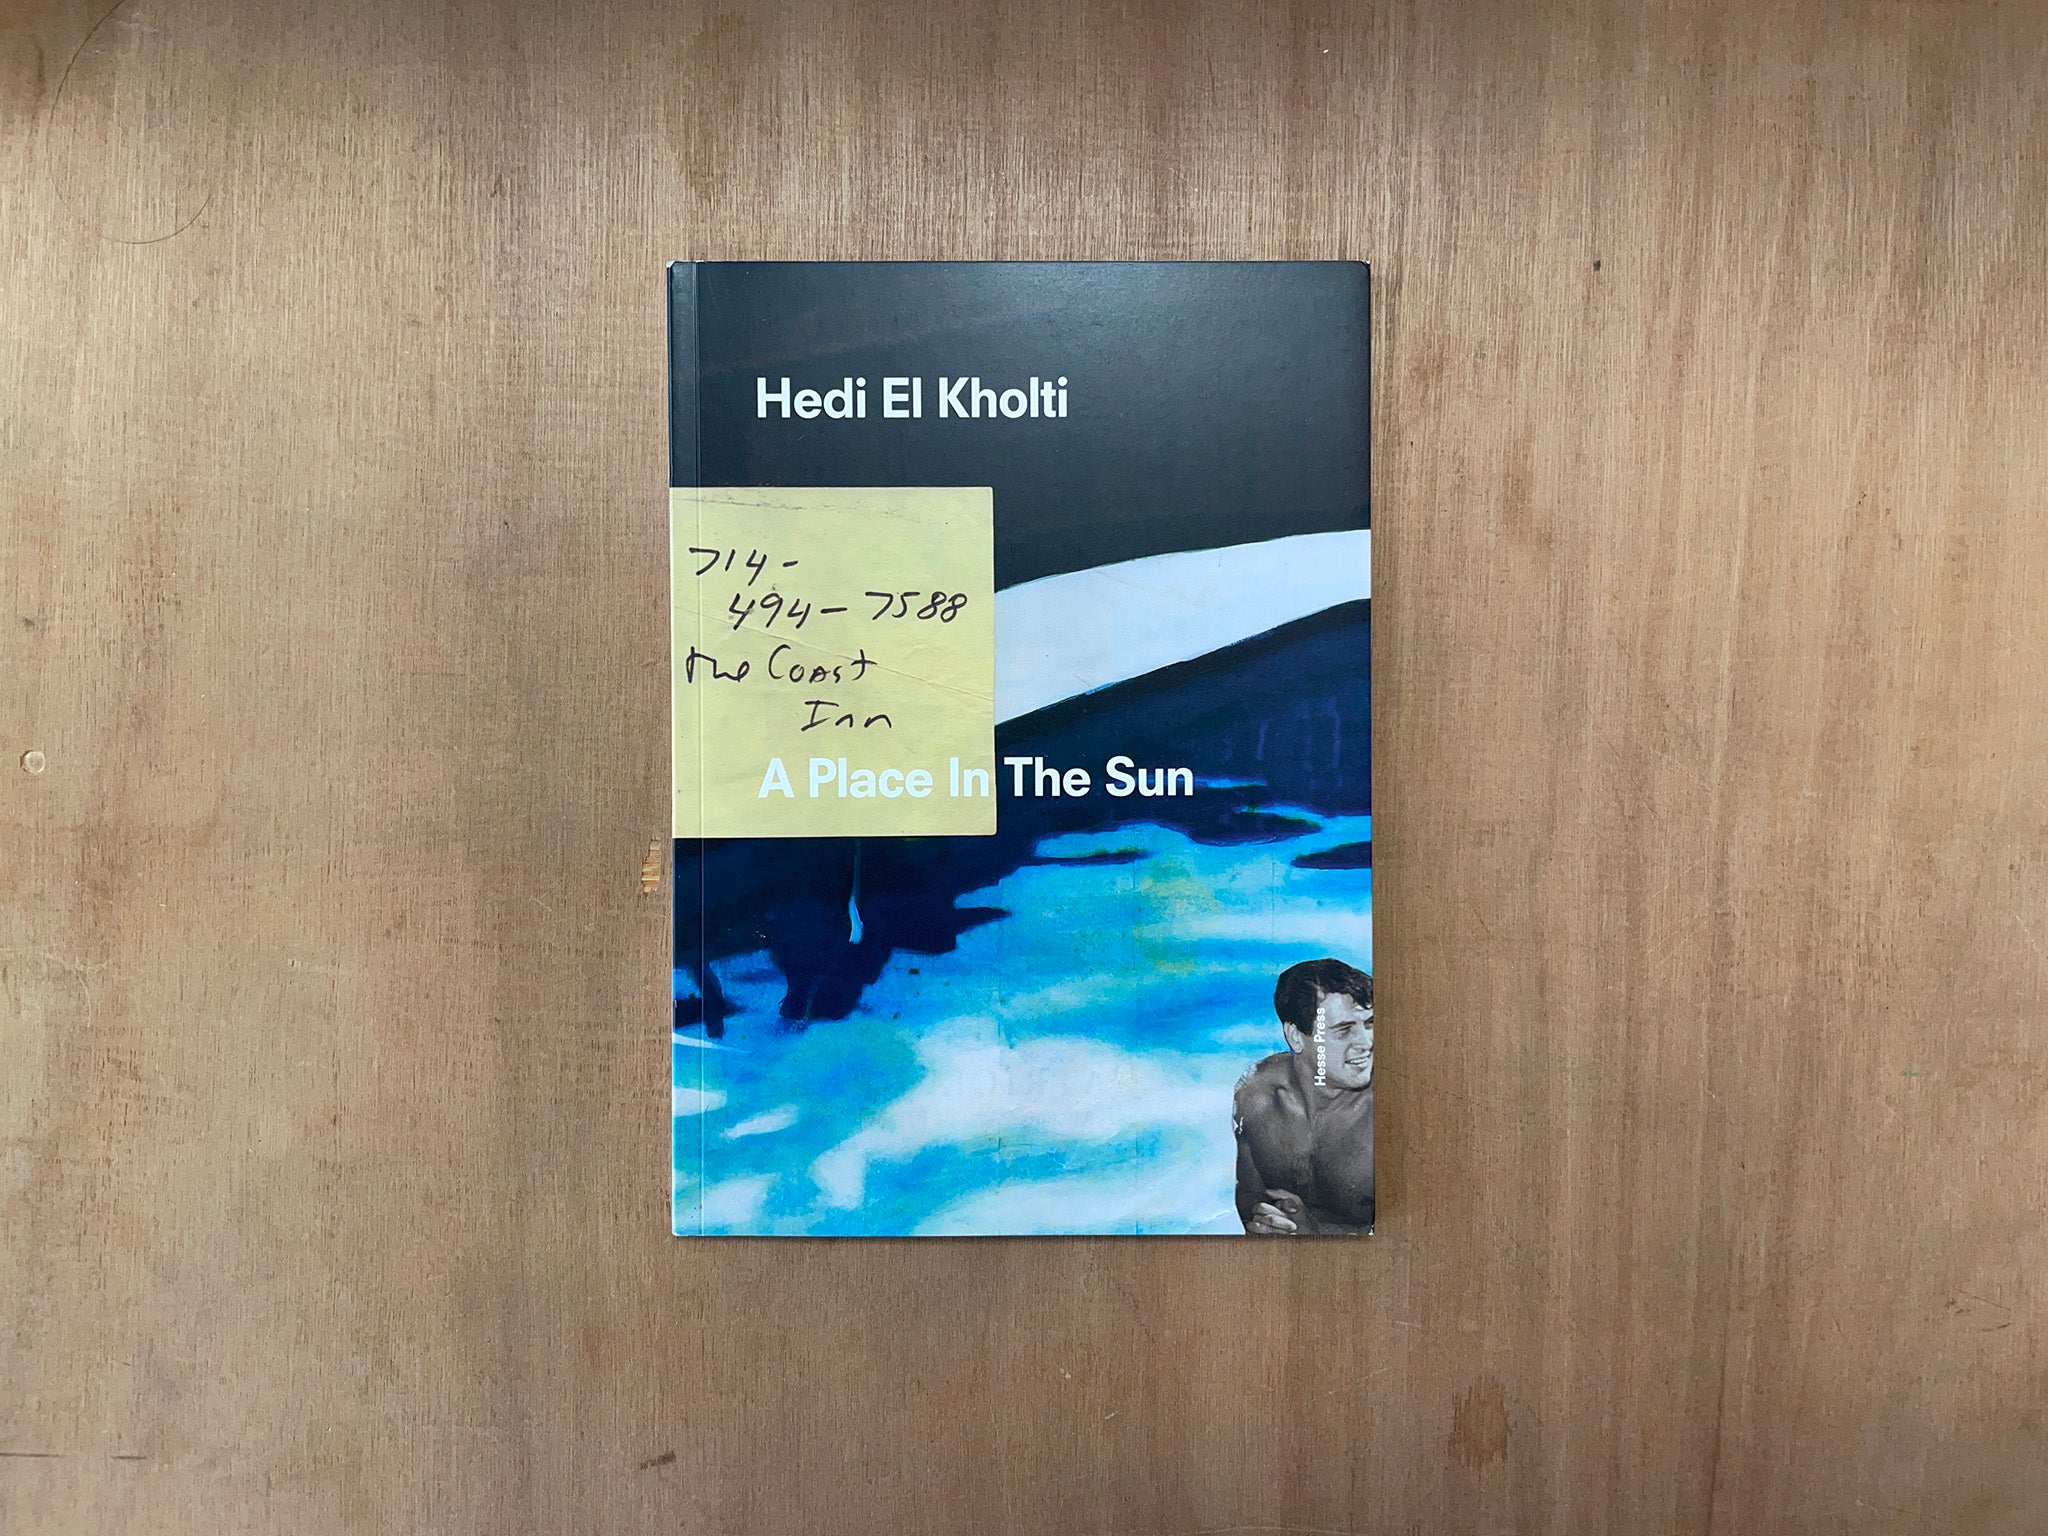 A PLACE IN THE SUN by Hedi El Kholti